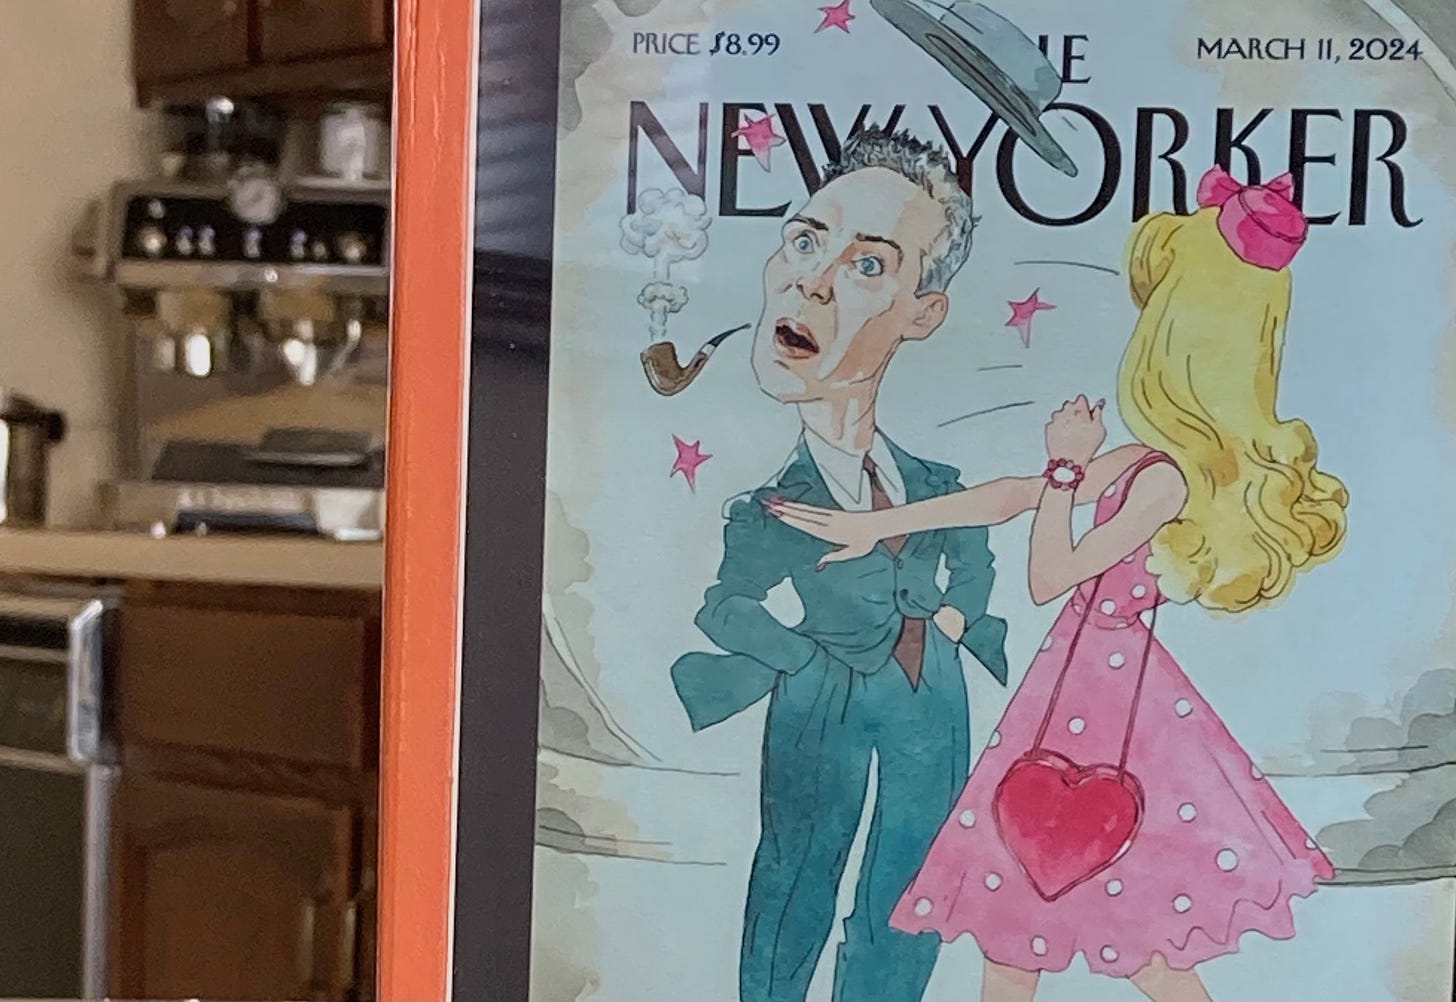 Author photo of iPad at kitchen table showing image of The New Yorker magazine's "Slappenheimer" cover, showing cartoon Barbie slapping Oppenheimer, knocking his pipe from his mouth and sending his hat flying off his head.